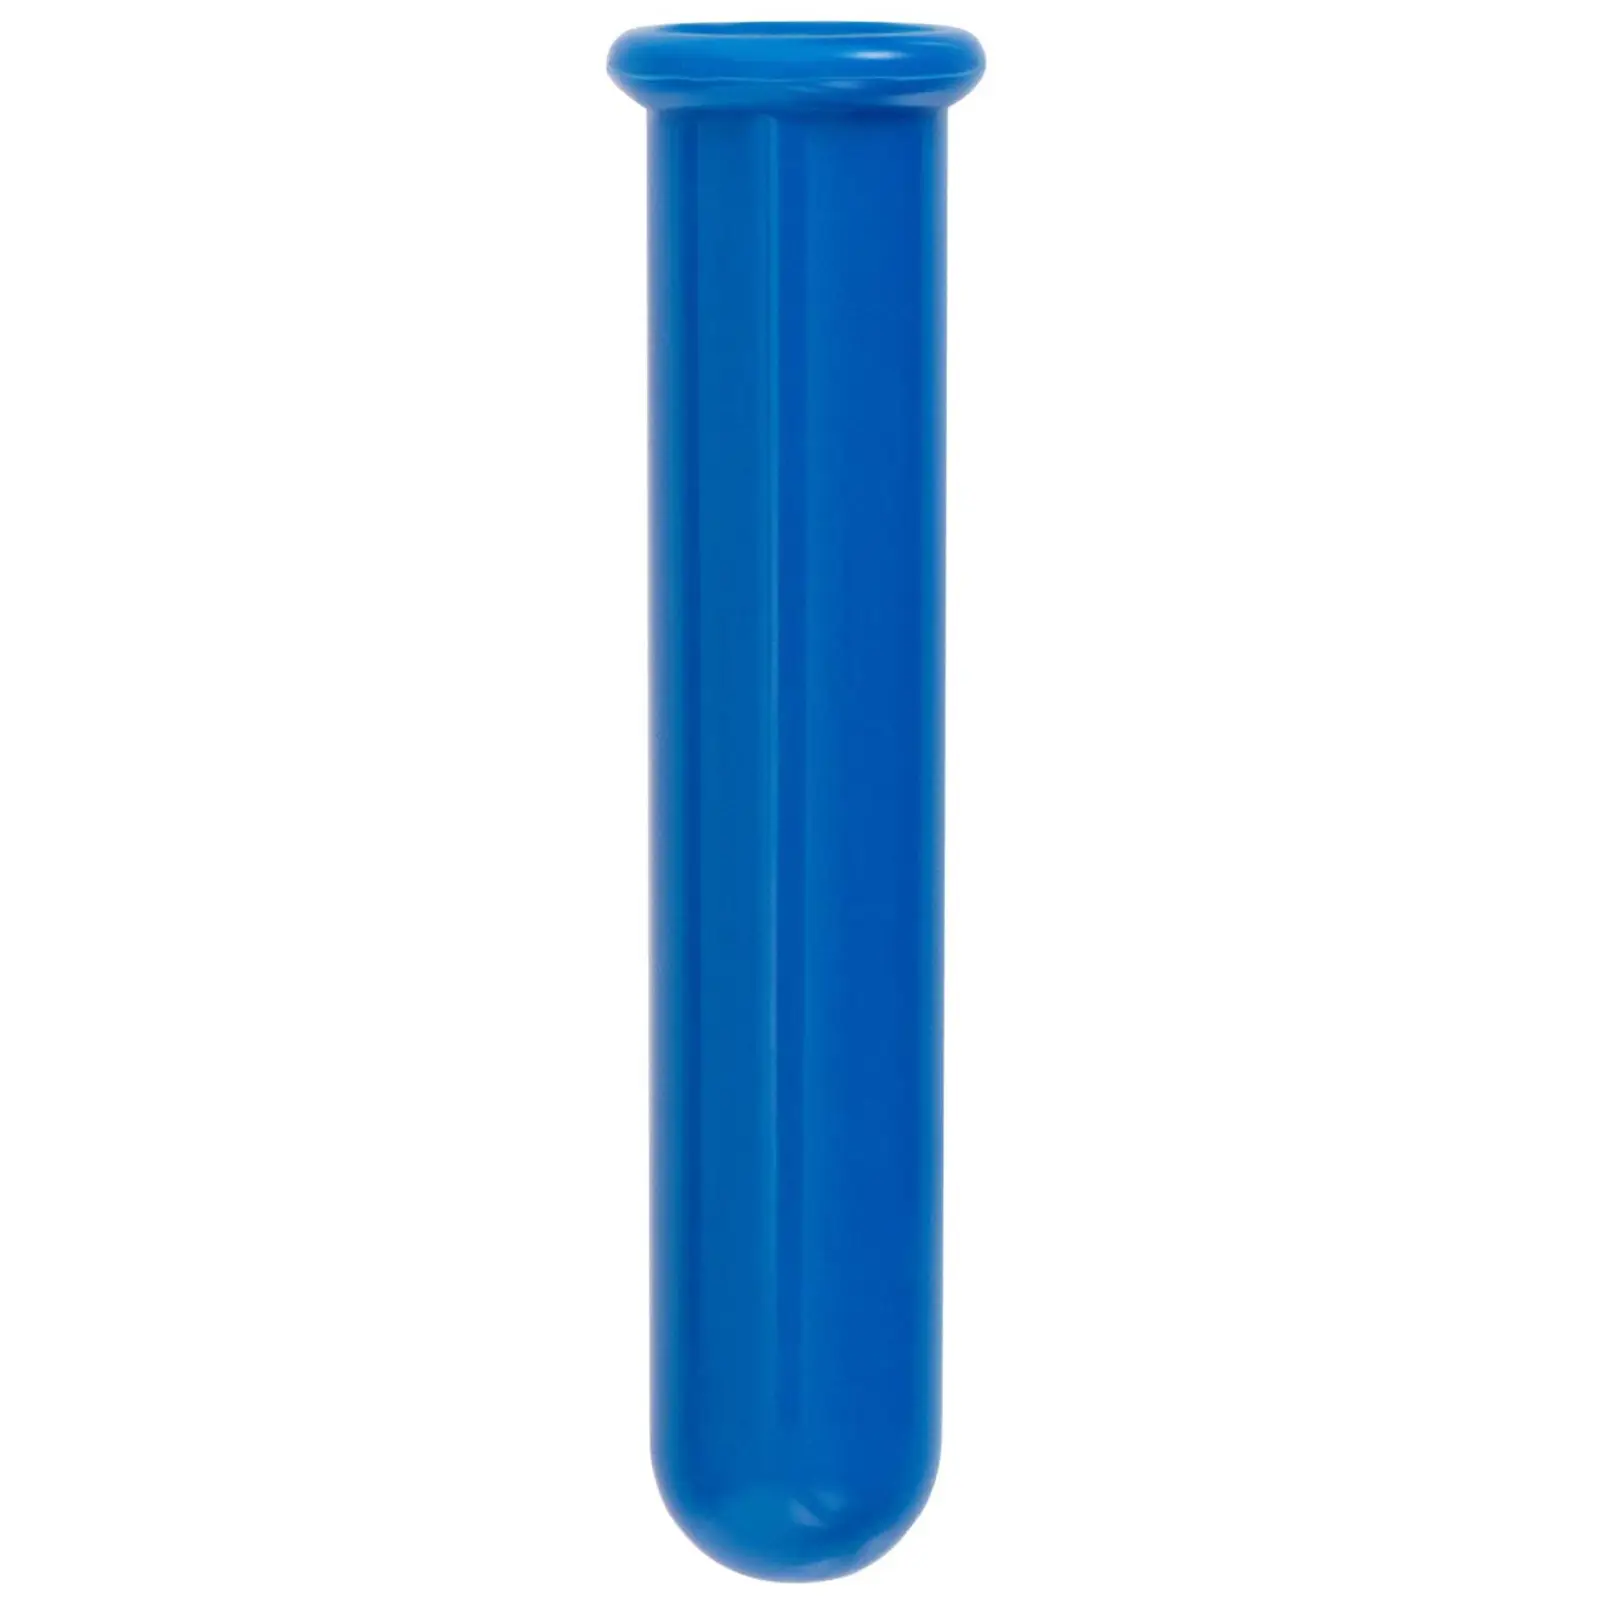 Centrifuge Tube Adapter - 8 pieces - 5 ml